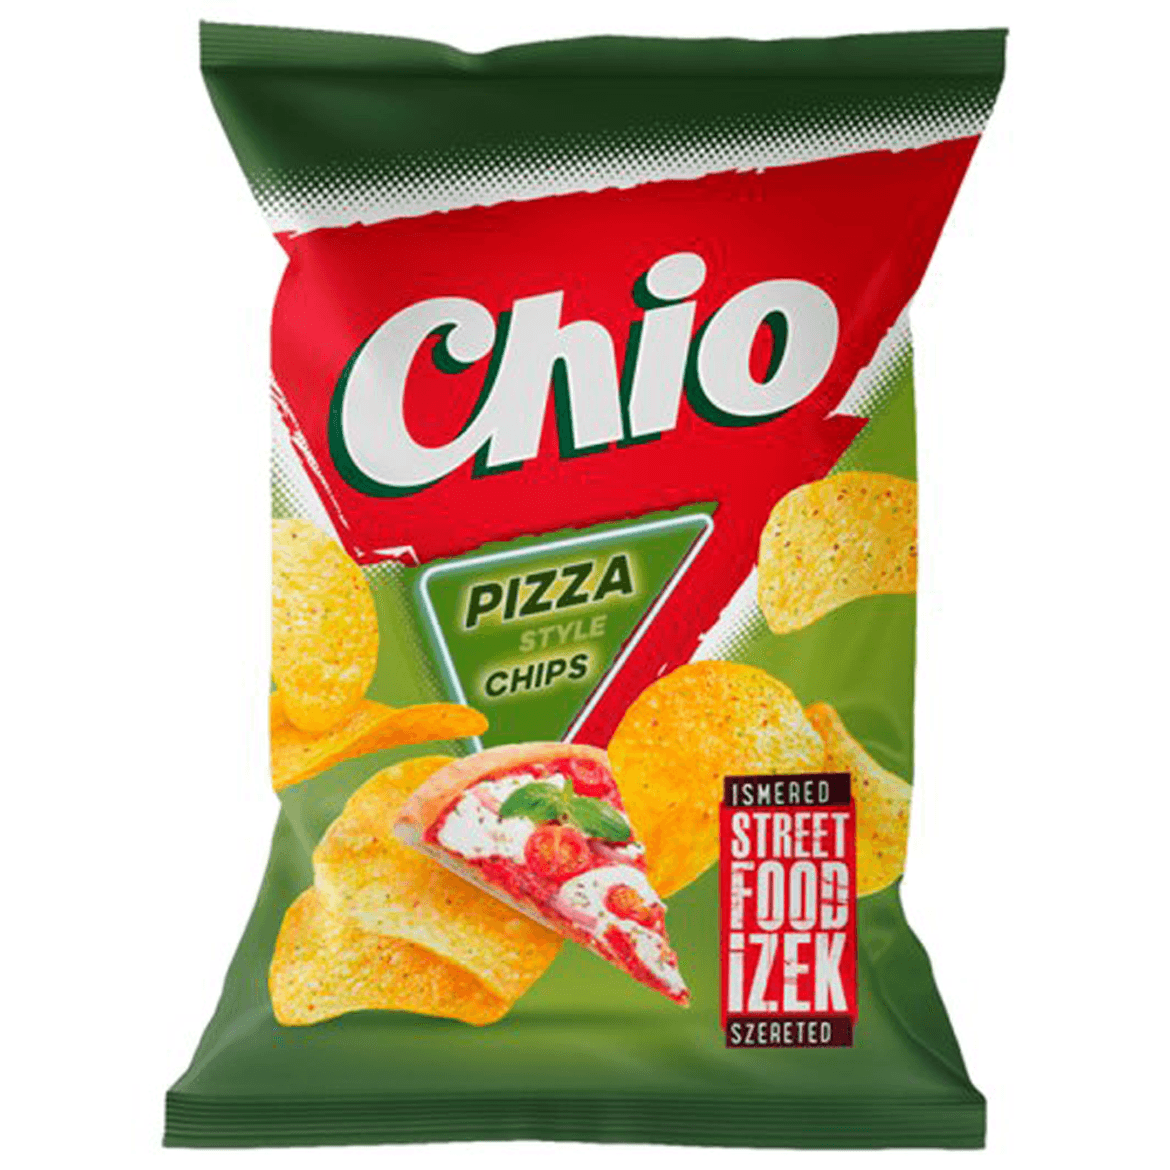 Chio chips Holiday Italian pizza style